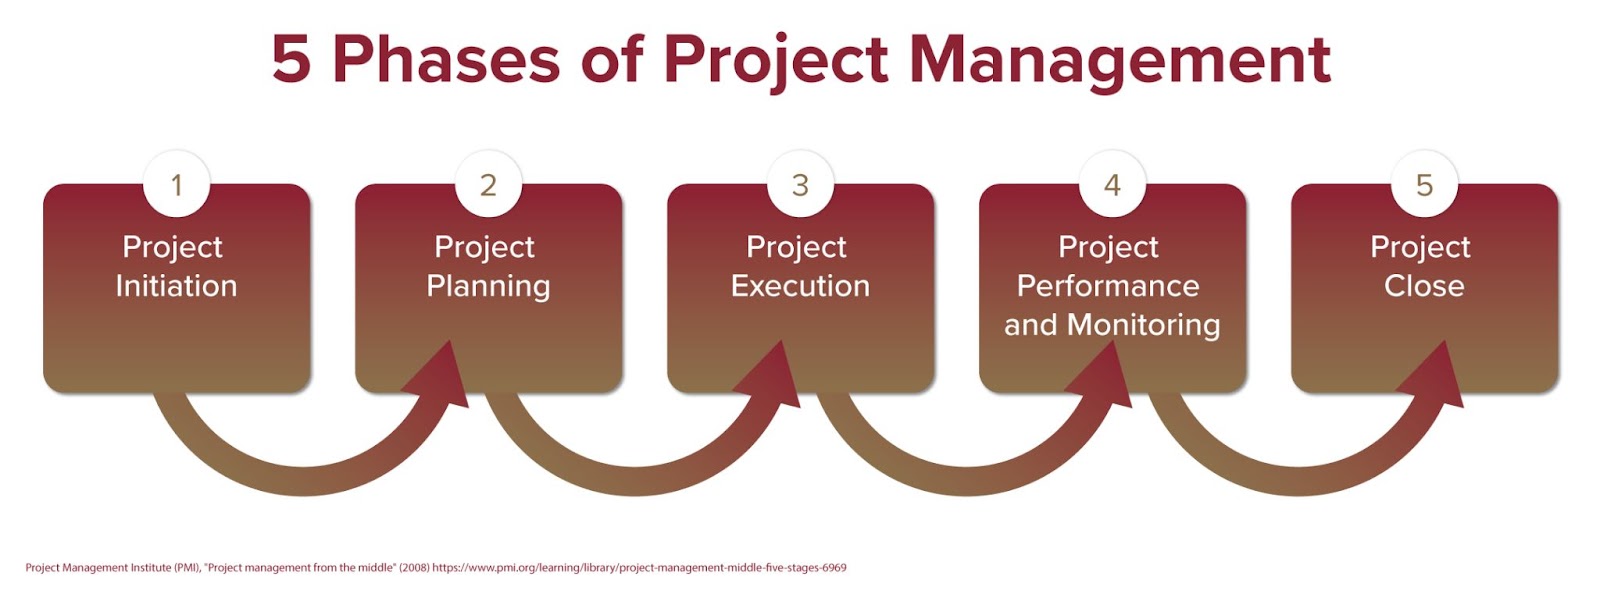 An image highlighting the five phases of the project management process.